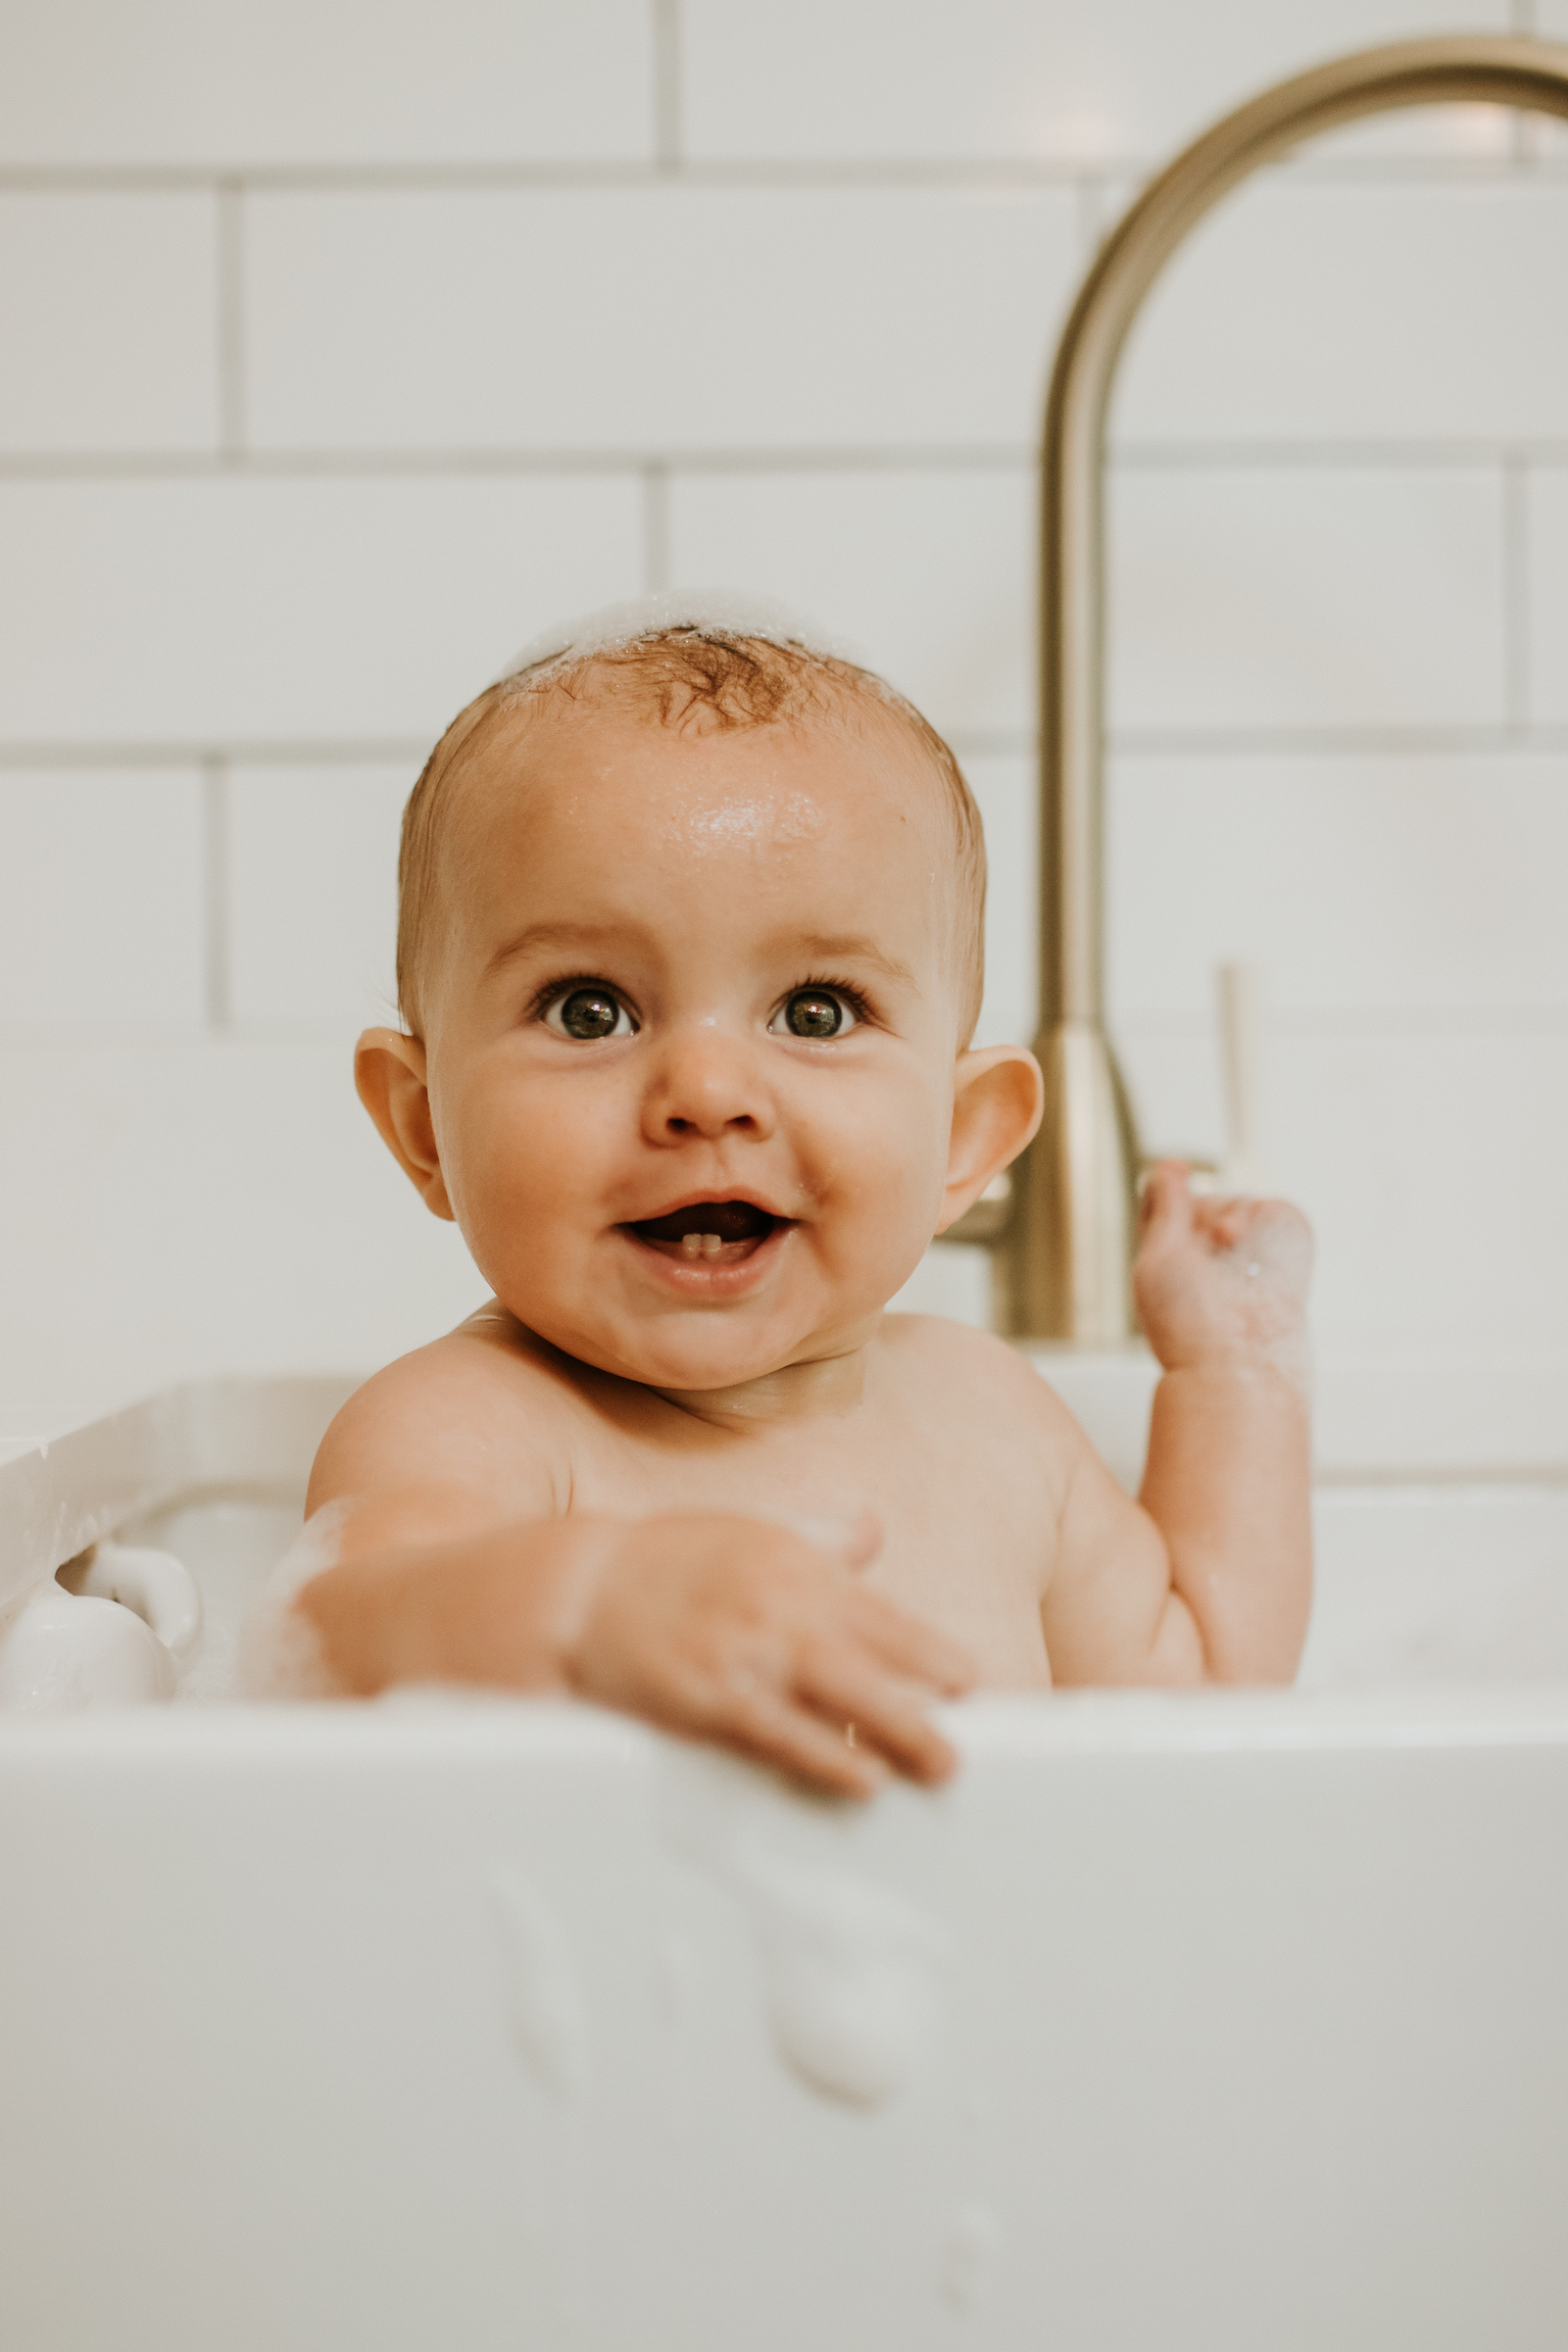 Baby having a sink bath in the kitchen and smiling at the camera